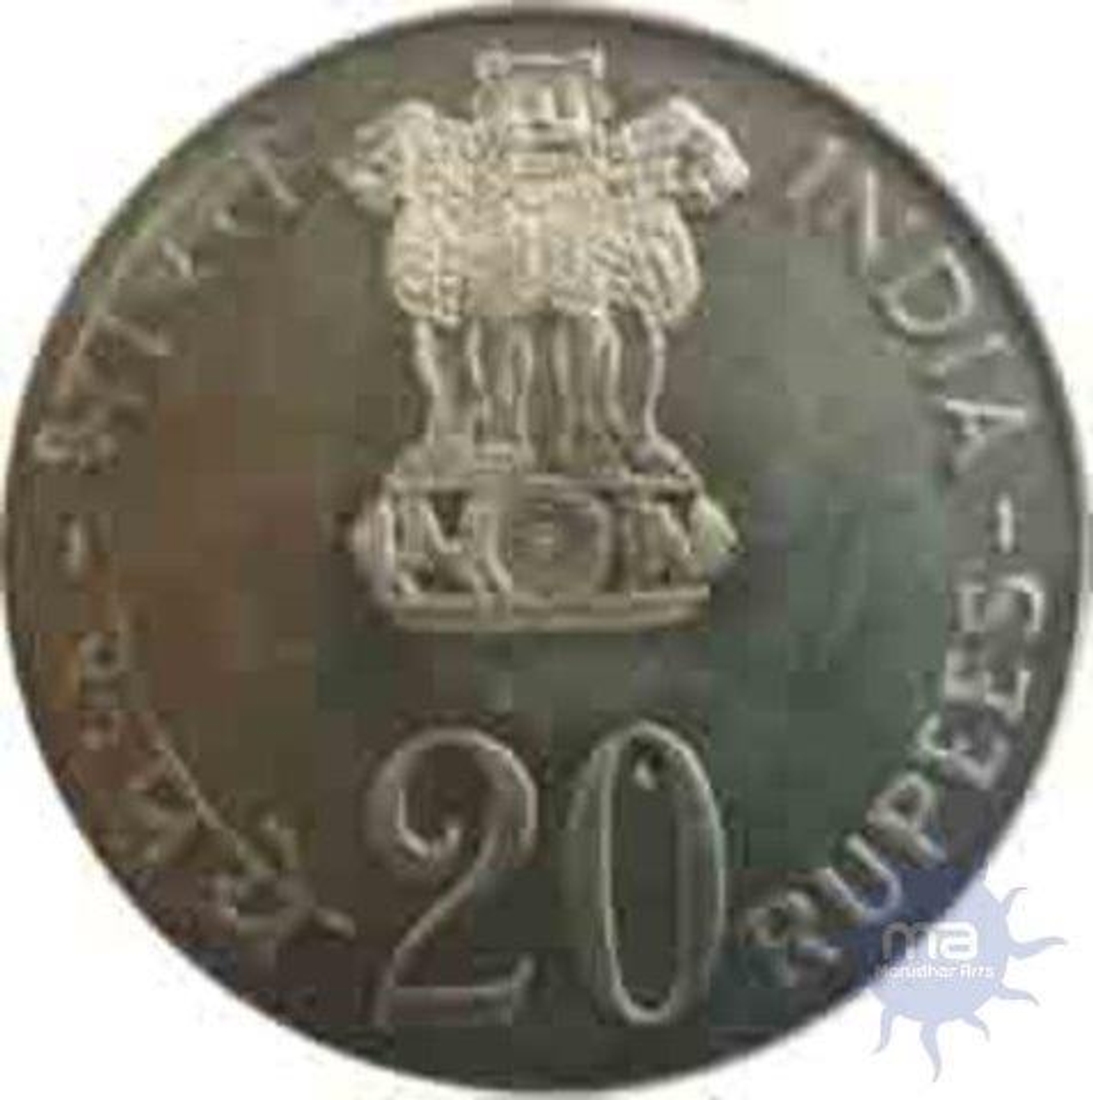 Twenty Rupees Coin of Republic India of Bombay  Mint of 1973.